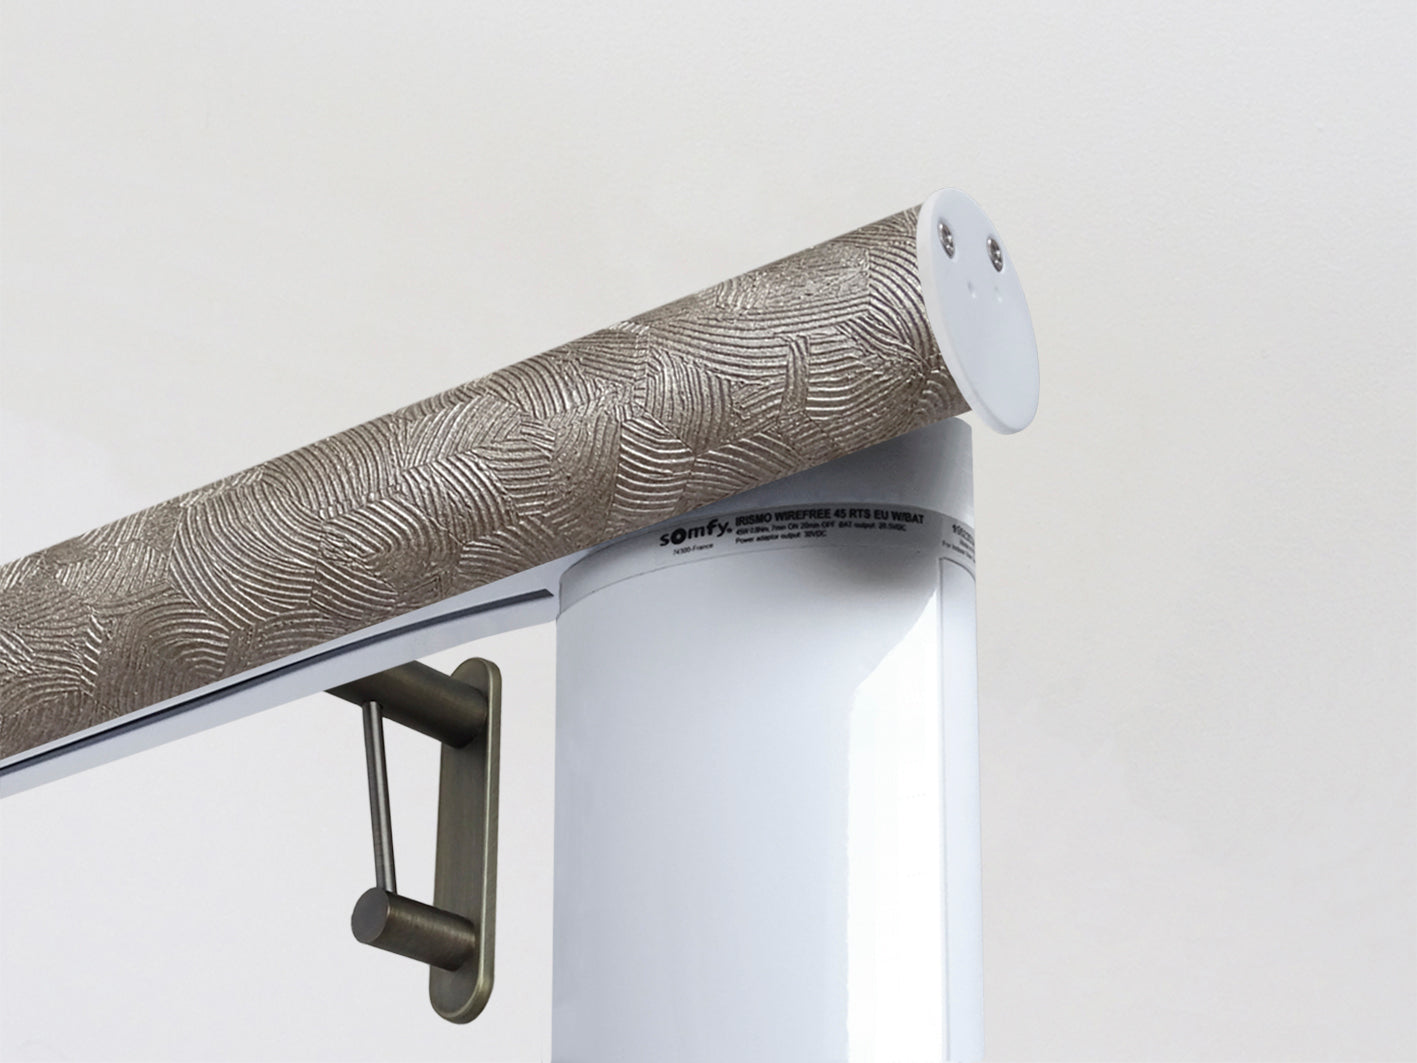 Motorised electric curtain pole, mains or battery powered using the Somfy Glydea track | Walcot House UK curtain pole specialists